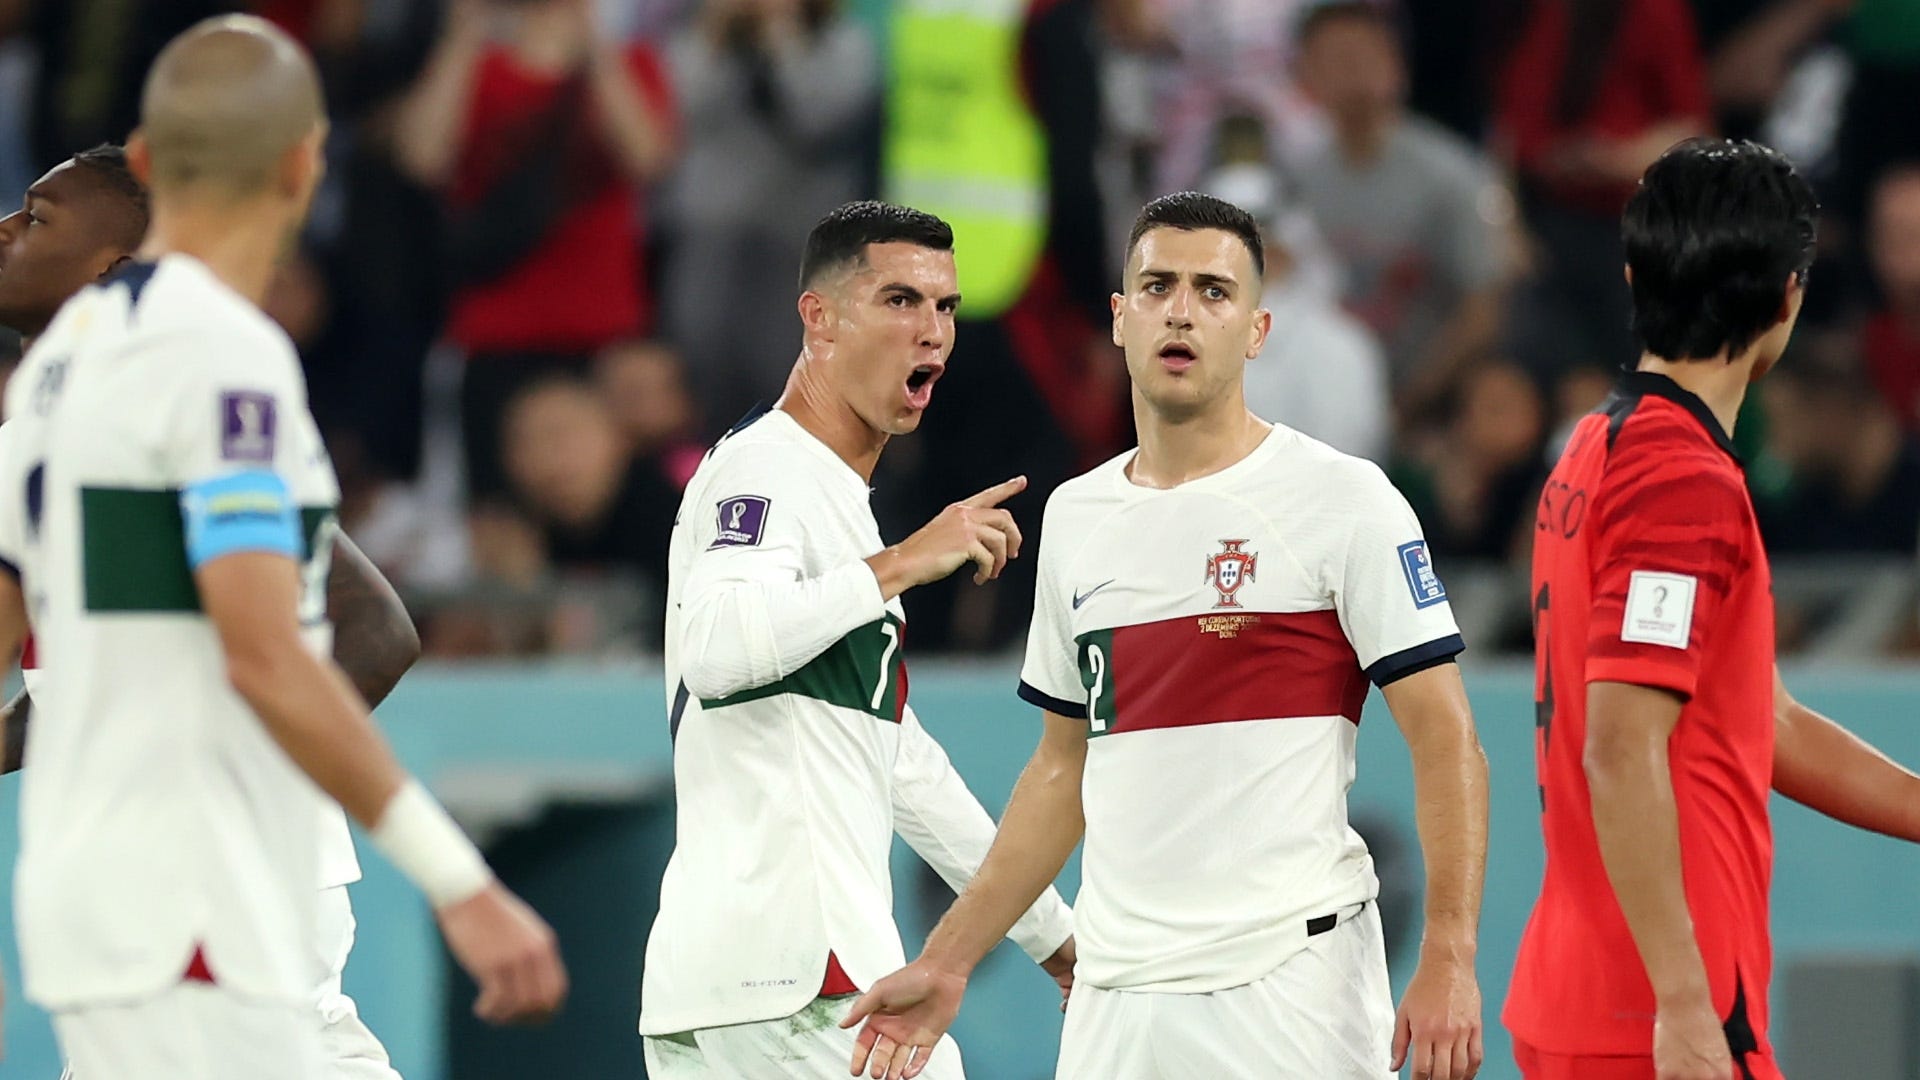 Portugal boss Santos explains why Cristiano Ronaldo reacted angrily to being subbed against South Korea | Goal.com India